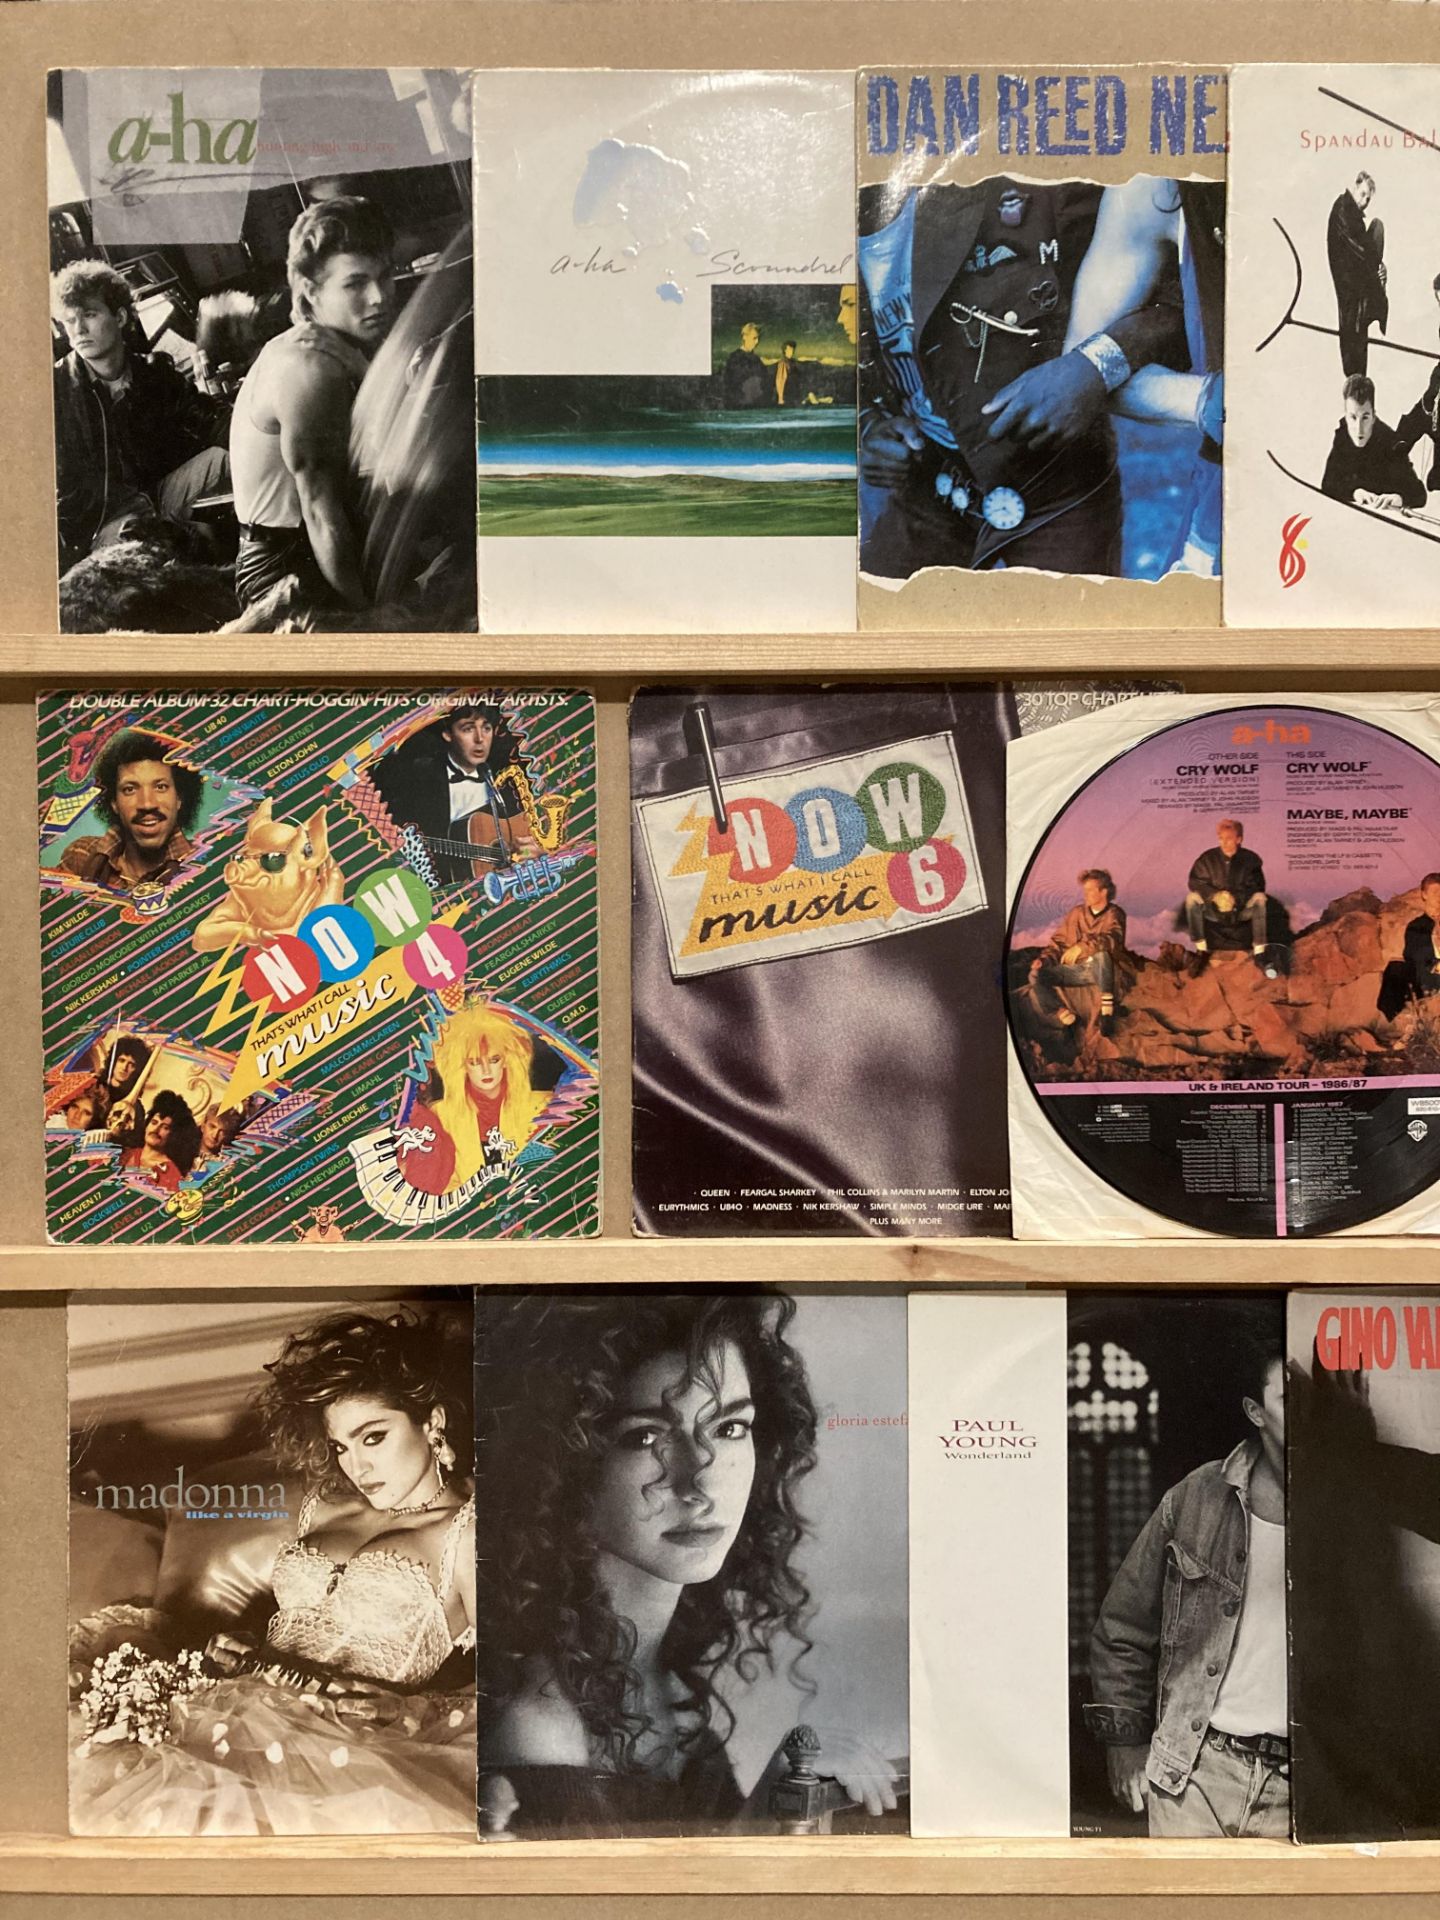 A collection of Pop/Soft Rock LPs and 7" singles including a number of Aha singles and two LPs, - Image 2 of 4